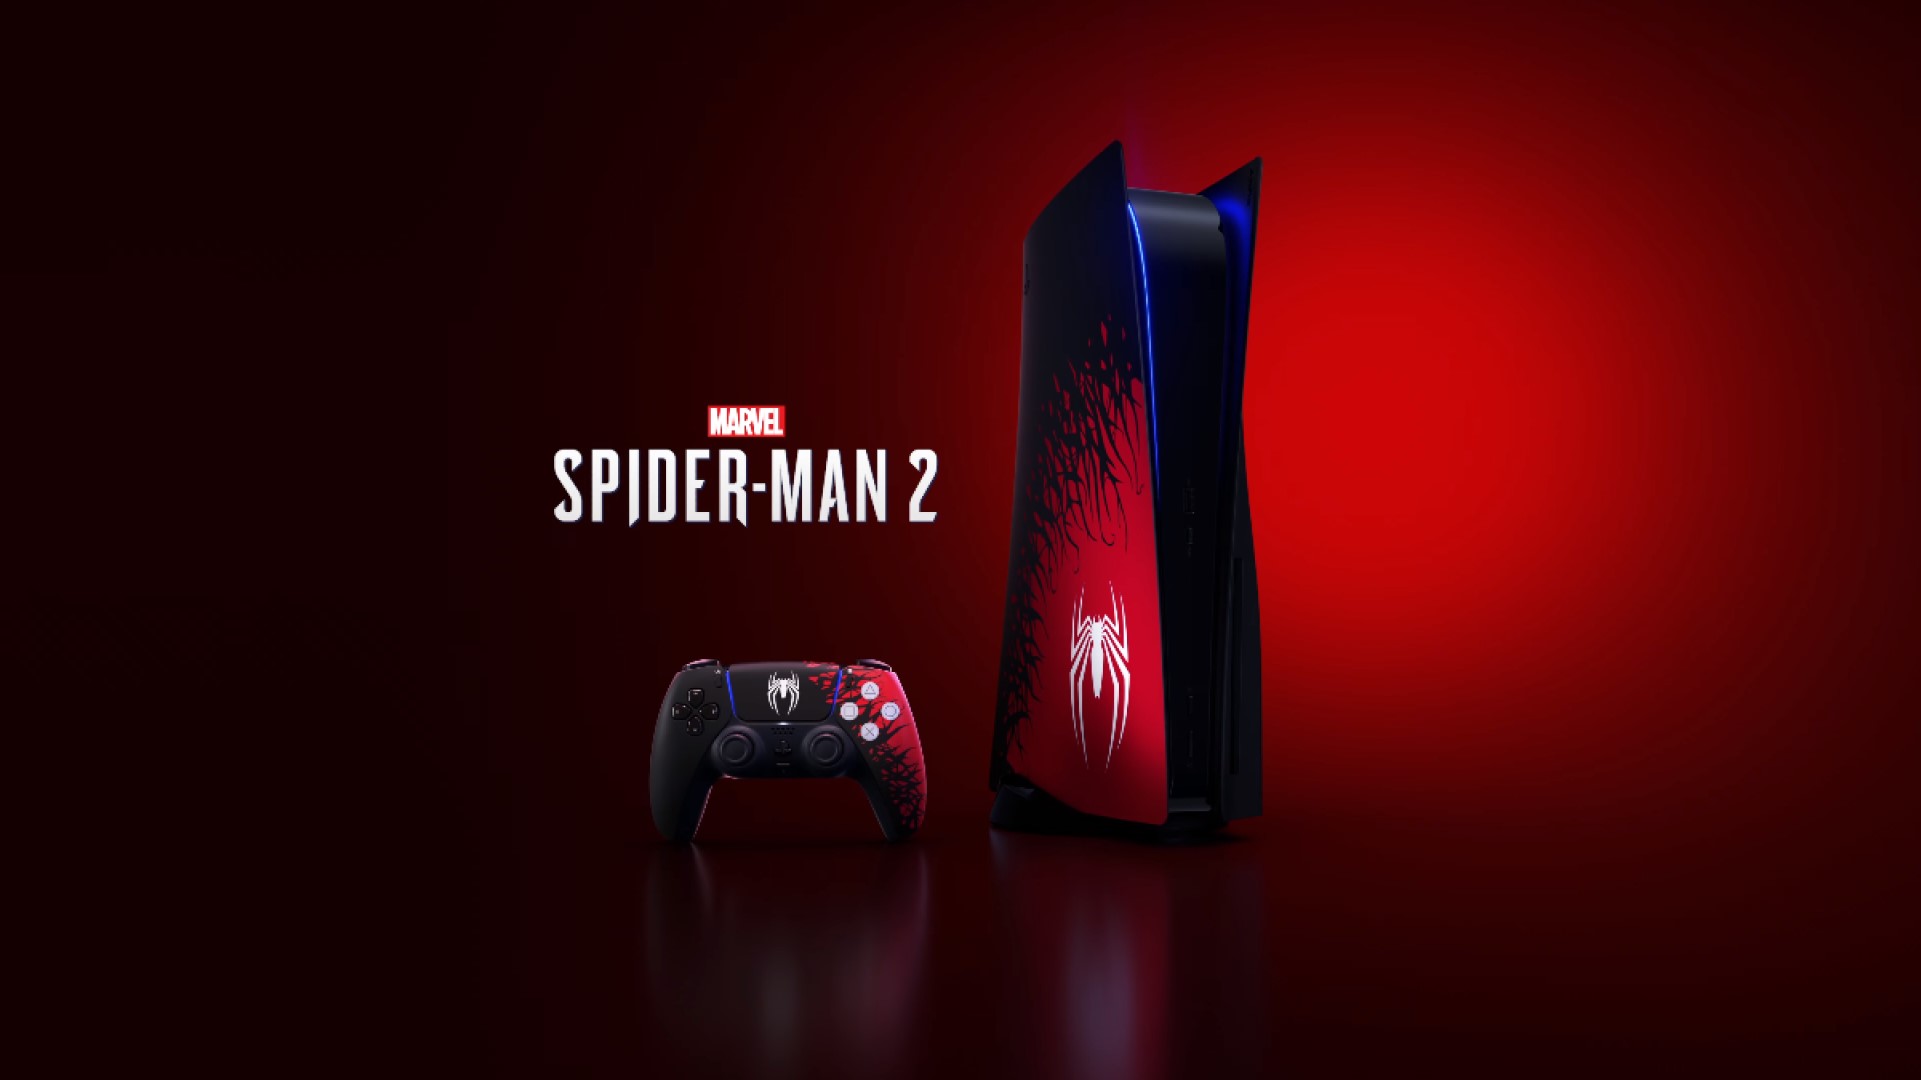 Marvel’s Spider-Man 2 Limited Edition PS5 Bundles is Now Available to Pre-Order